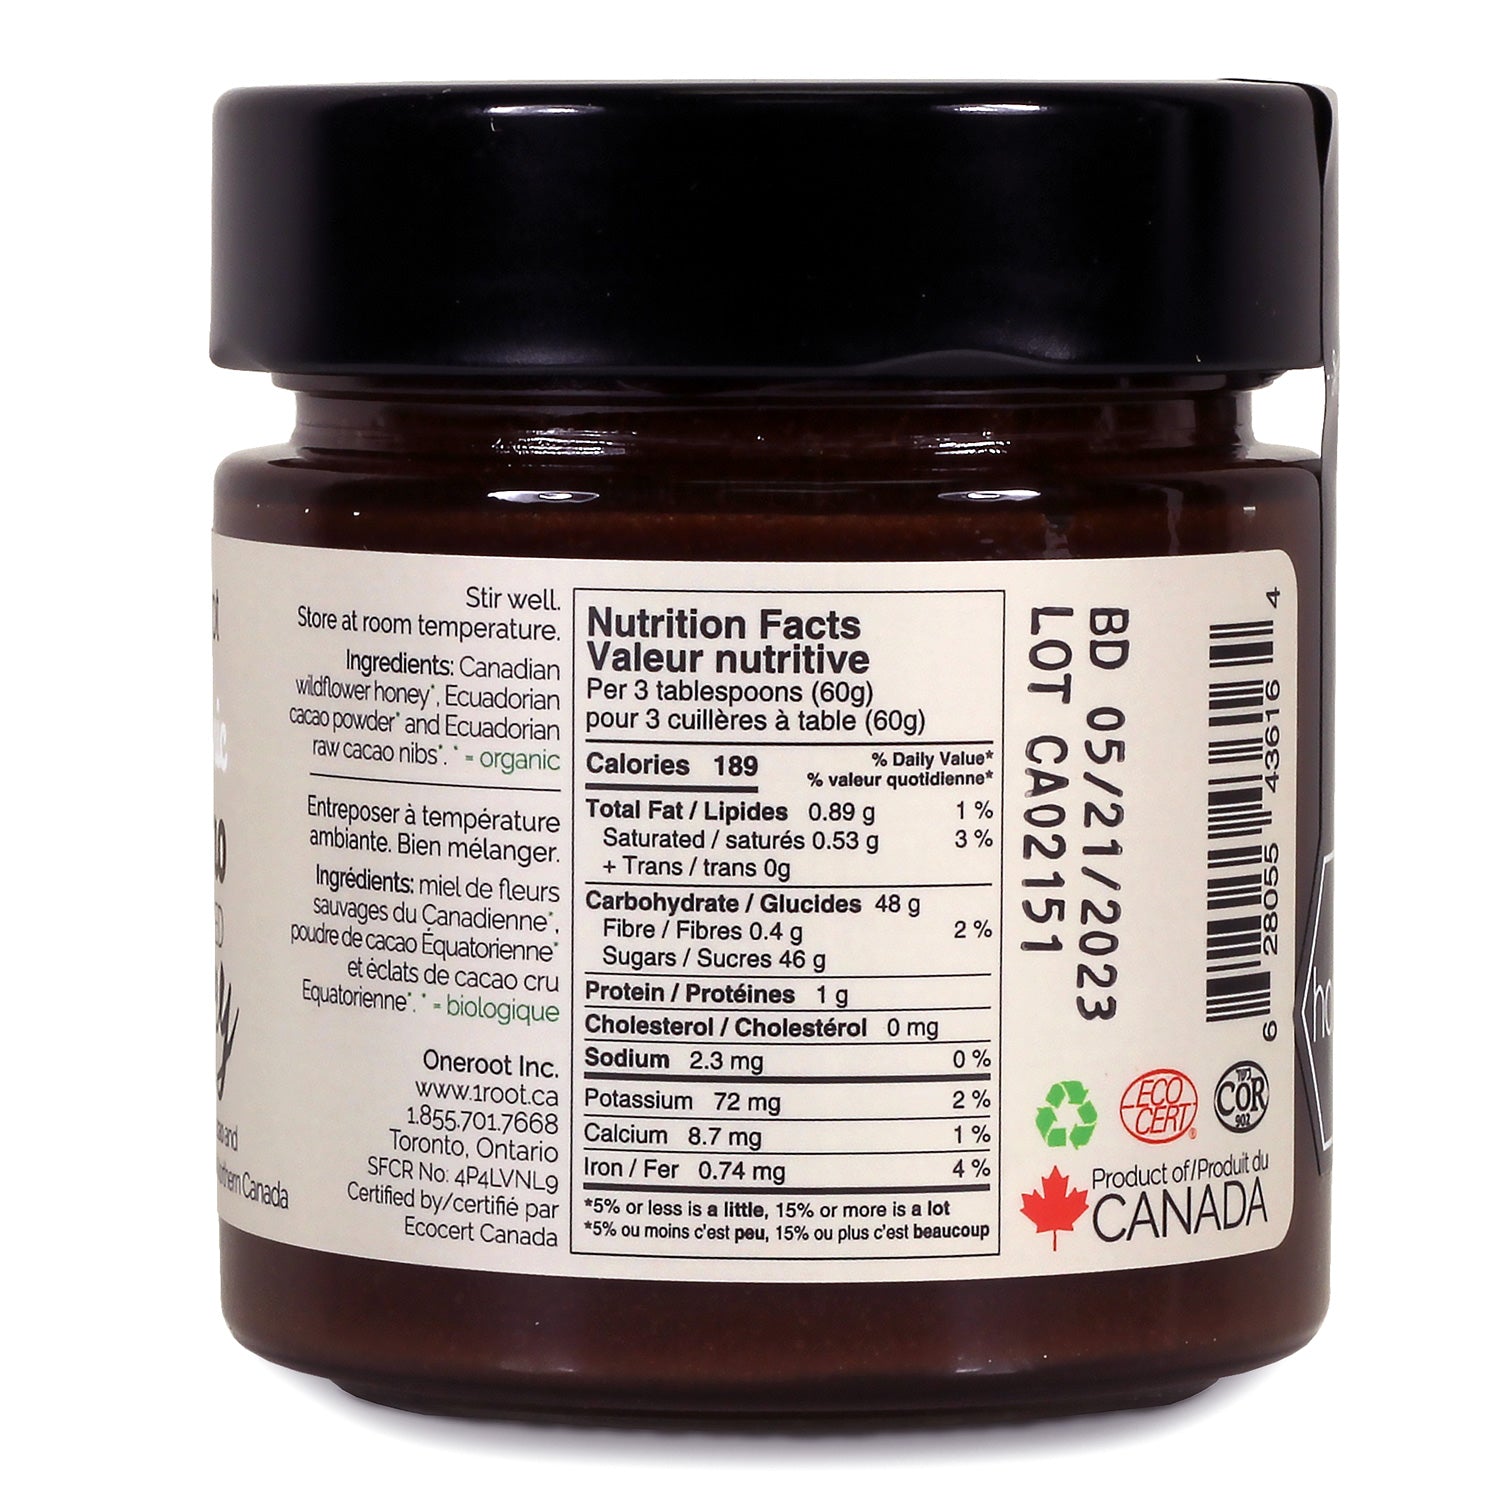 Organic Cacao Infused Honey - 300g - organic cacao nibs canada